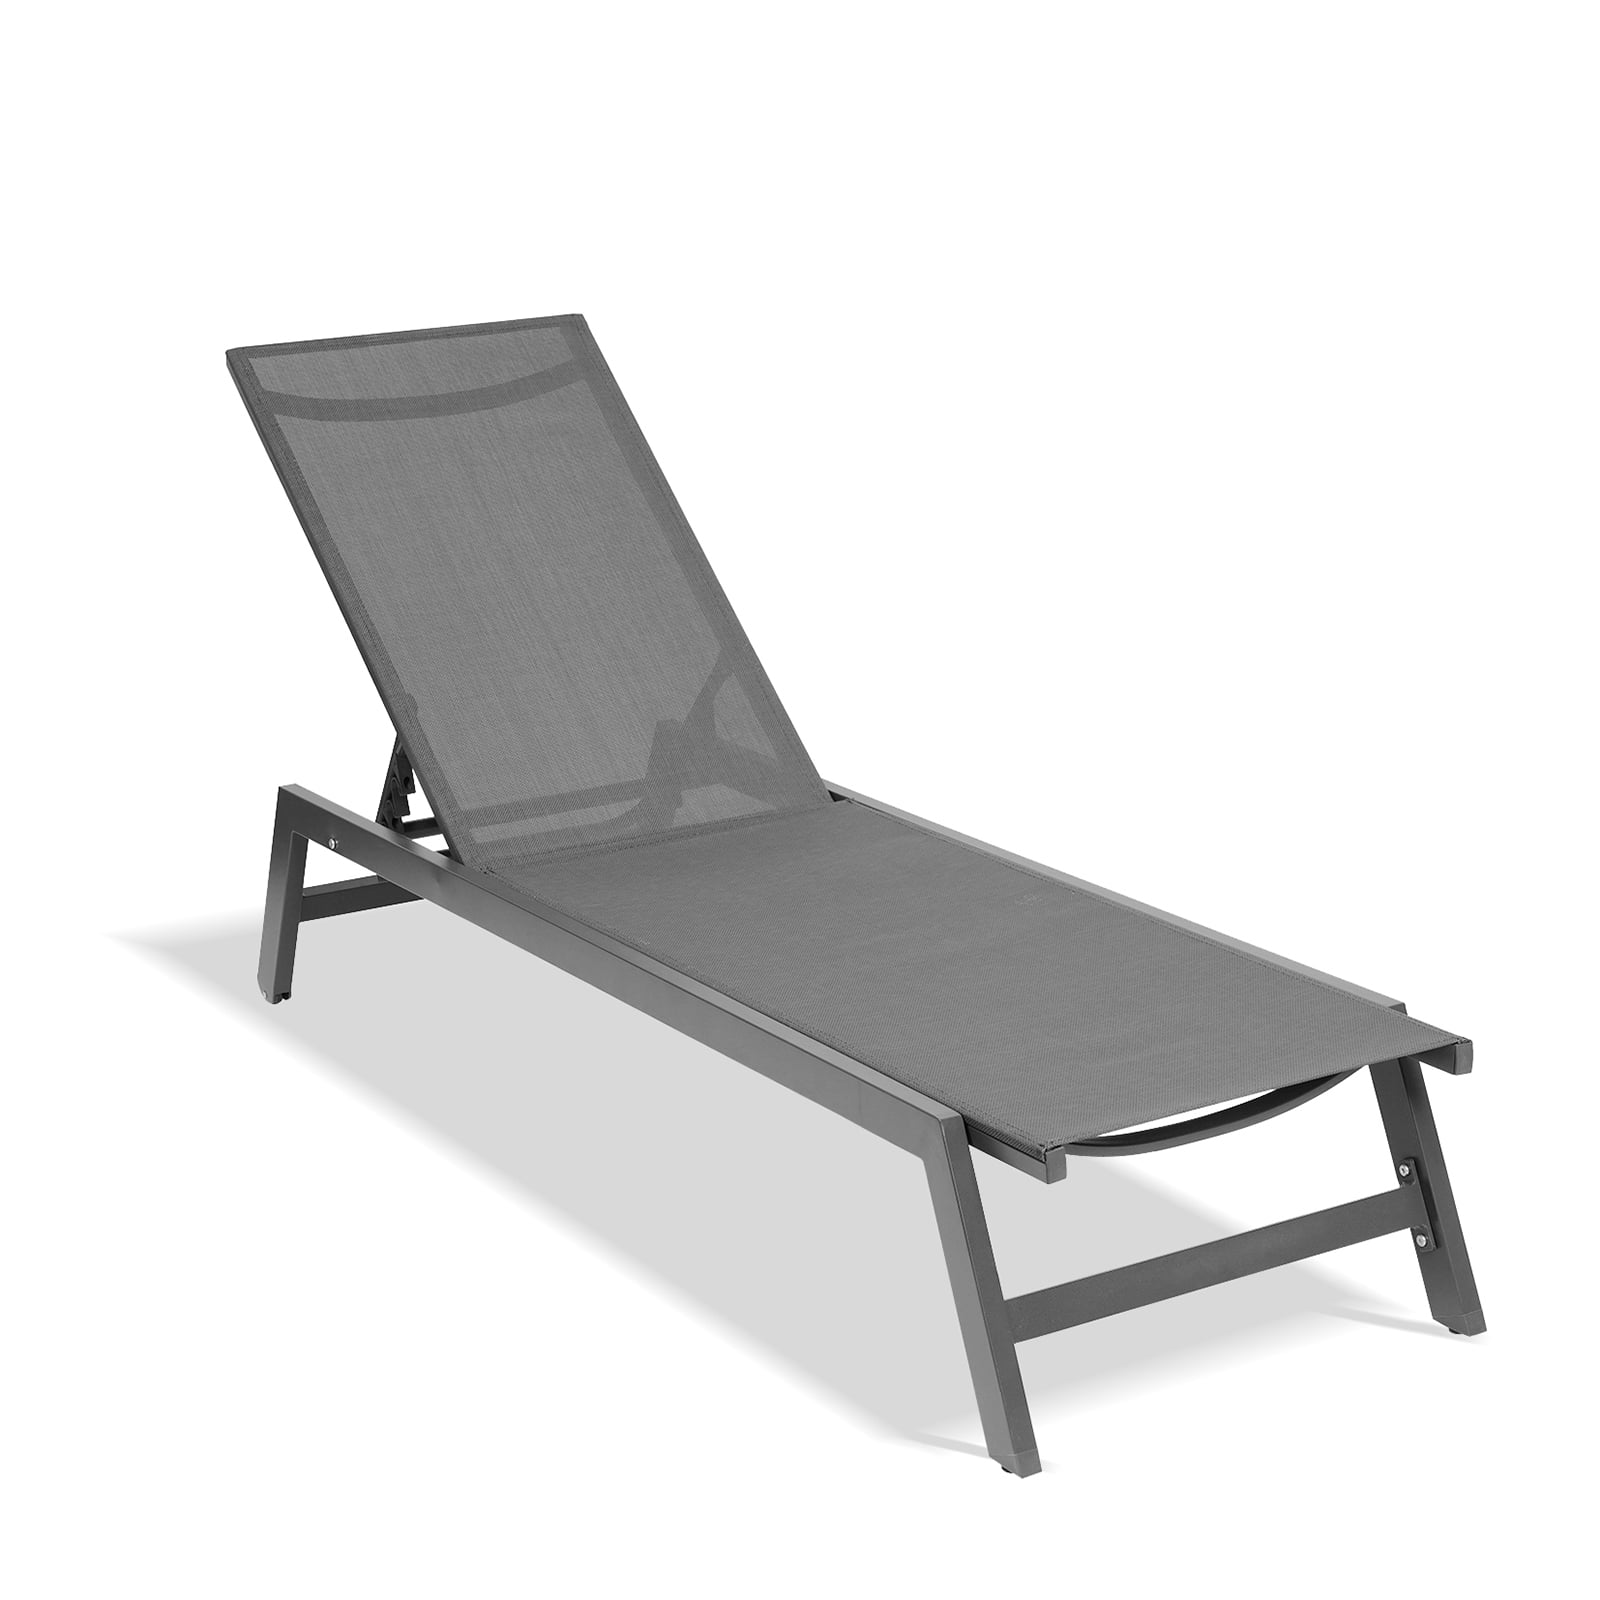 Patio Adjustable Aluminum Chaise Lounge Chair Recliner 5 Position Adjustable Backrest Folding Recliners for Beach Yard Pool Outdoor Chaise Lounge Chair 